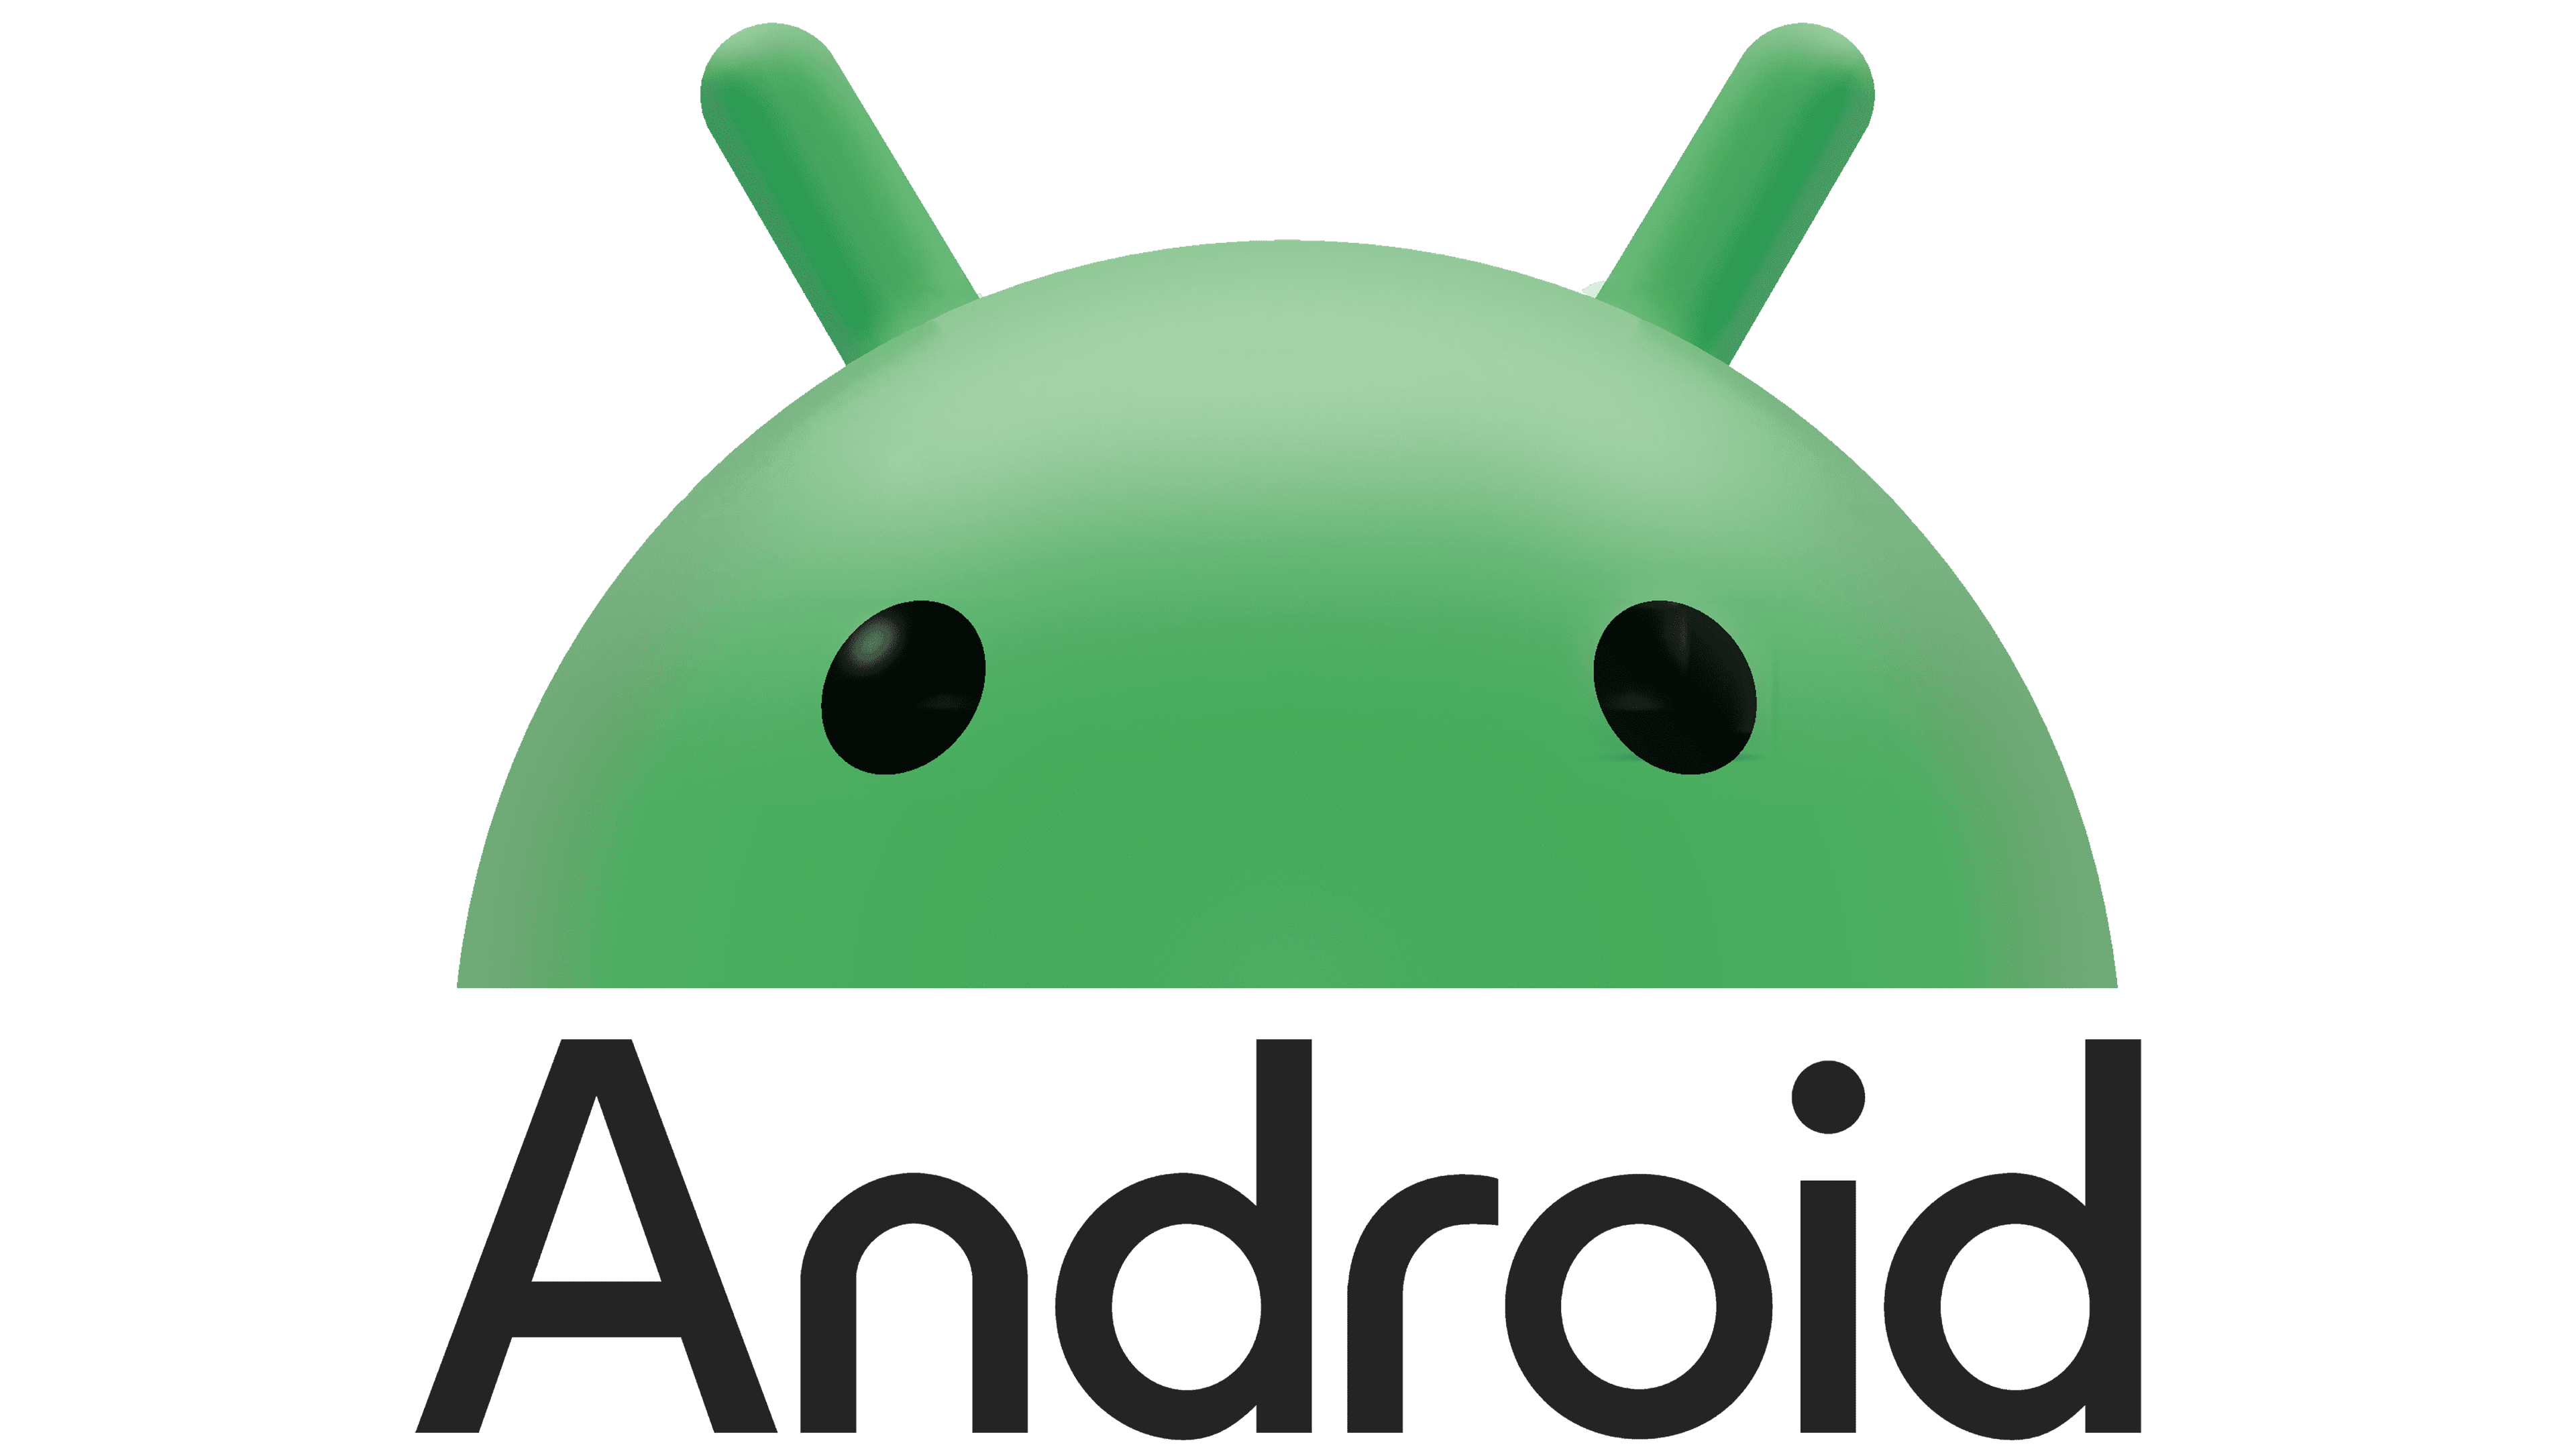 This is the new Android logo